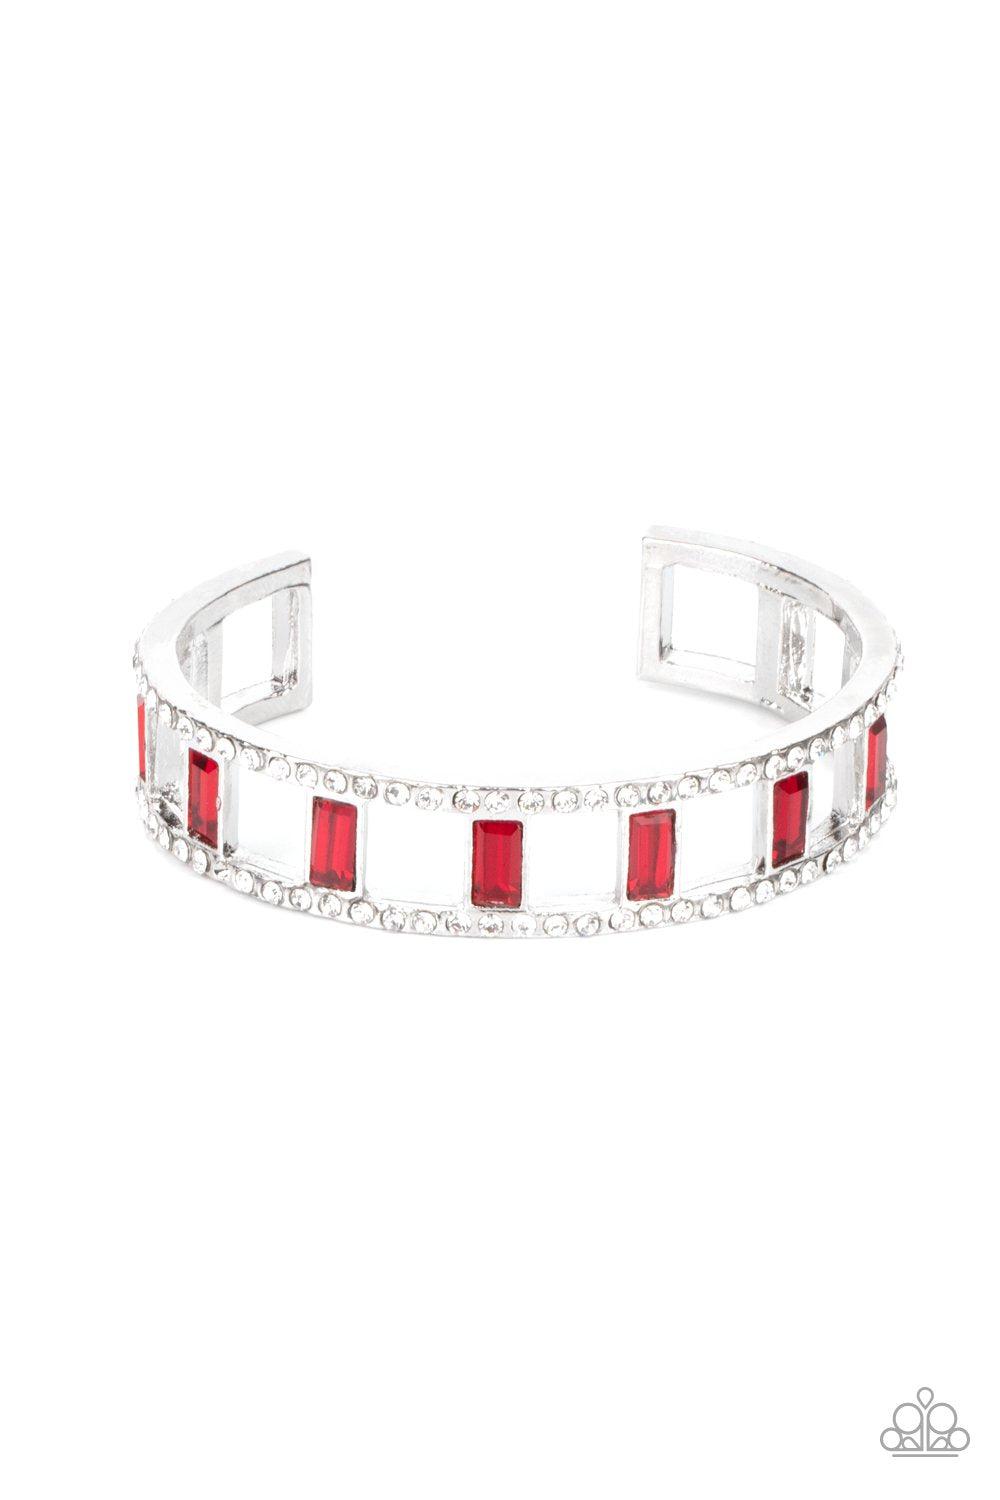 Industrial Icing Red and White Rhinestone Cuff Bracelet - Paparazzi Accessories- lightbox - CarasShop.com - $5 Jewelry by Cara Jewels